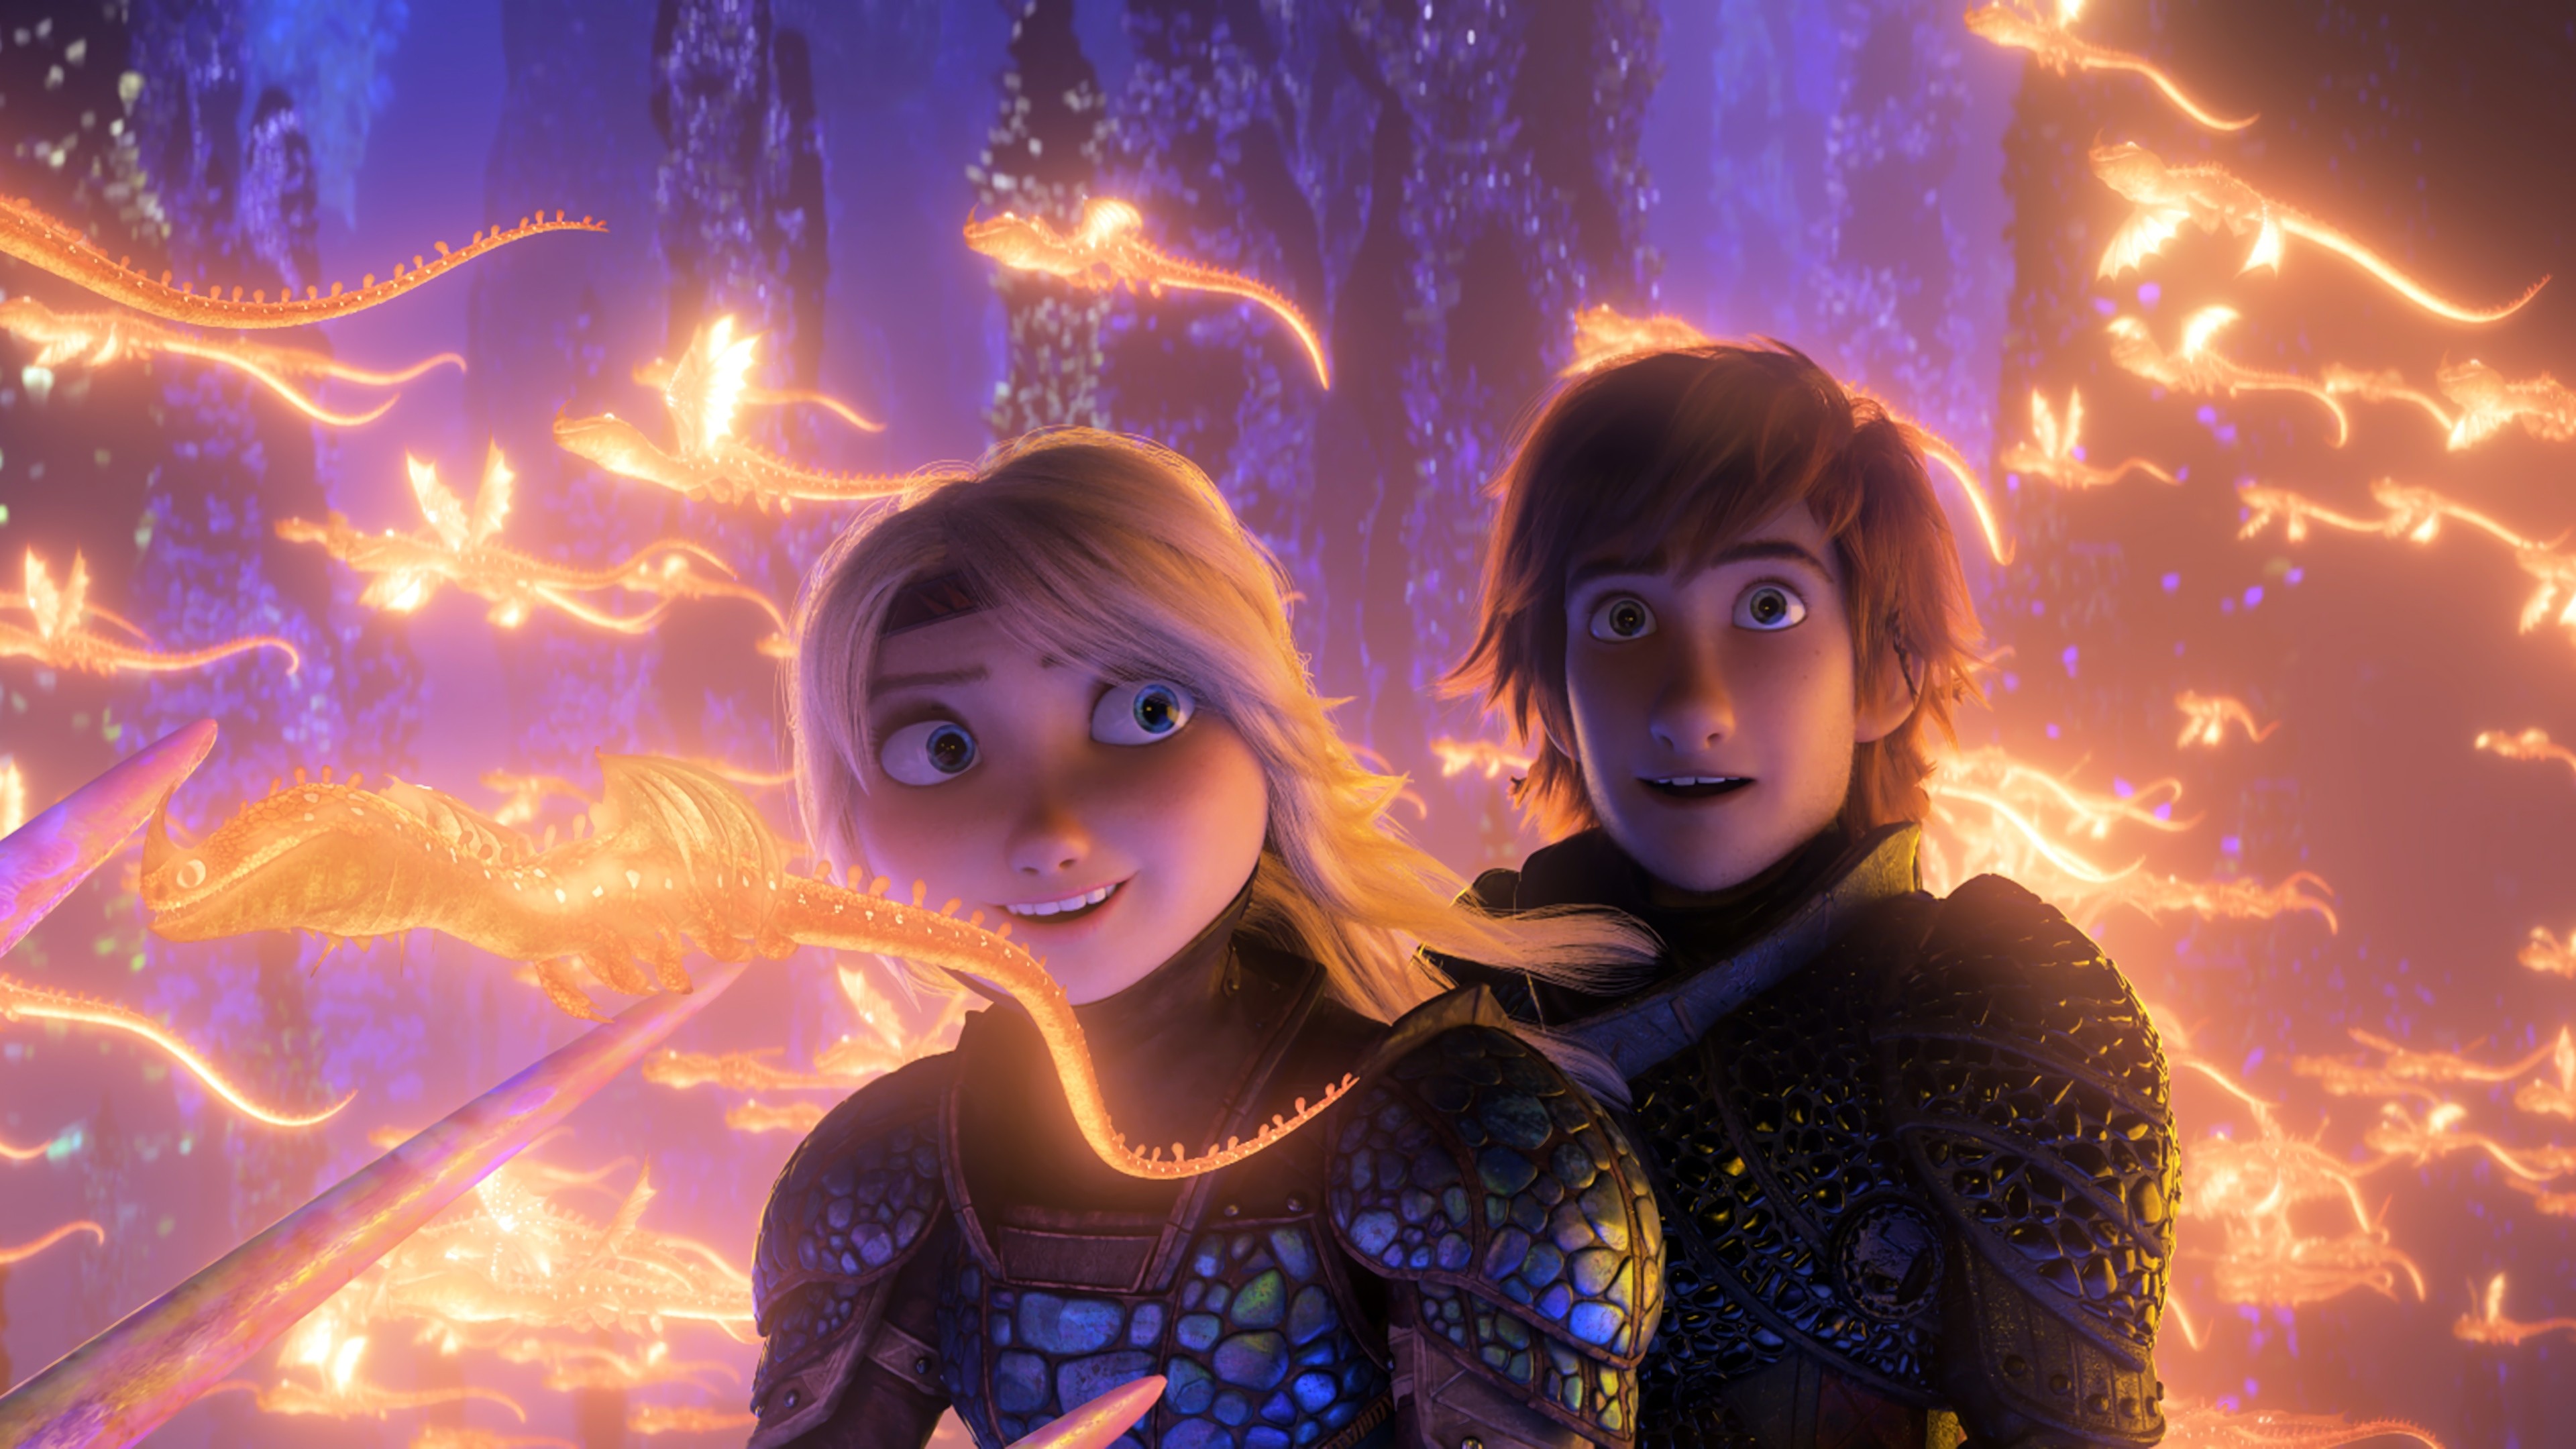 How To Train Your Dragon 3 How To Train Your Dragon 3 Dragon Animation Cartoon Hiccup 3840x2160